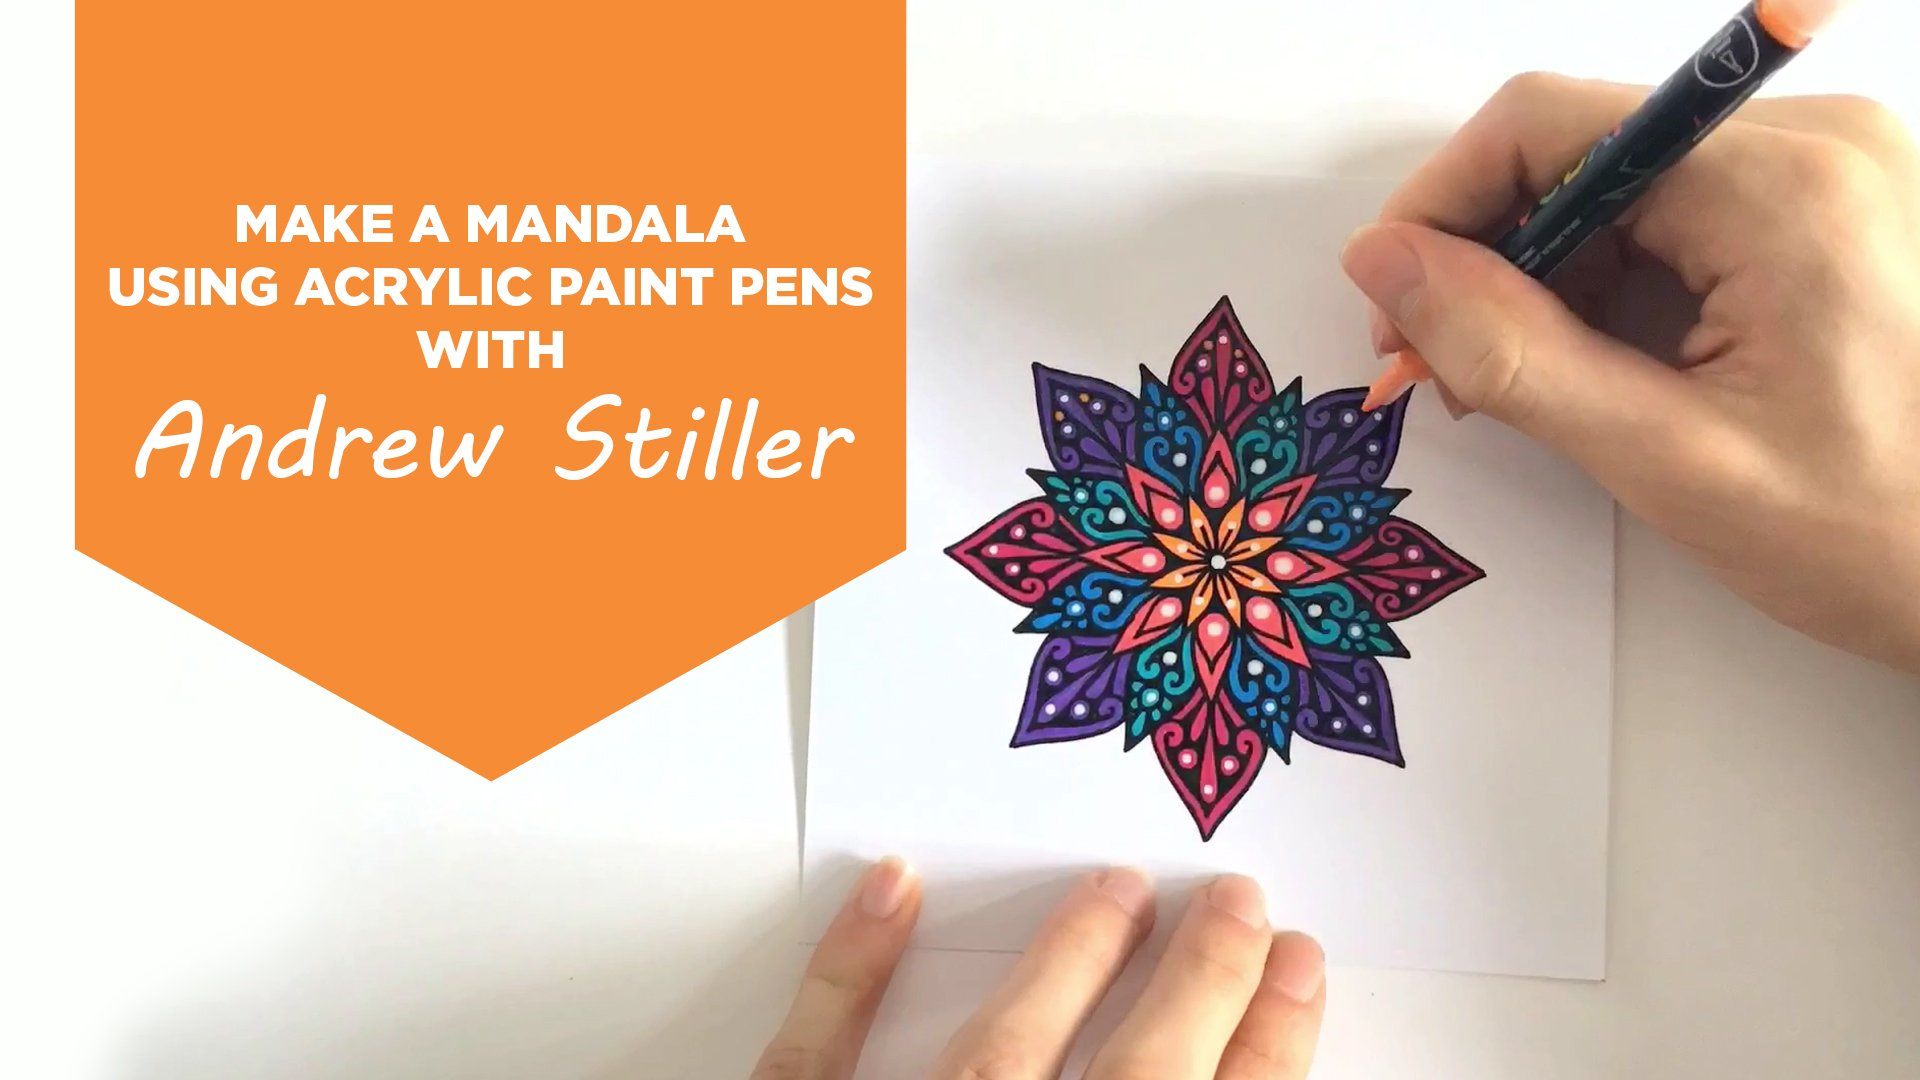 Make a Mandala Using Acrylic Paint Pens with Andrew Stiller